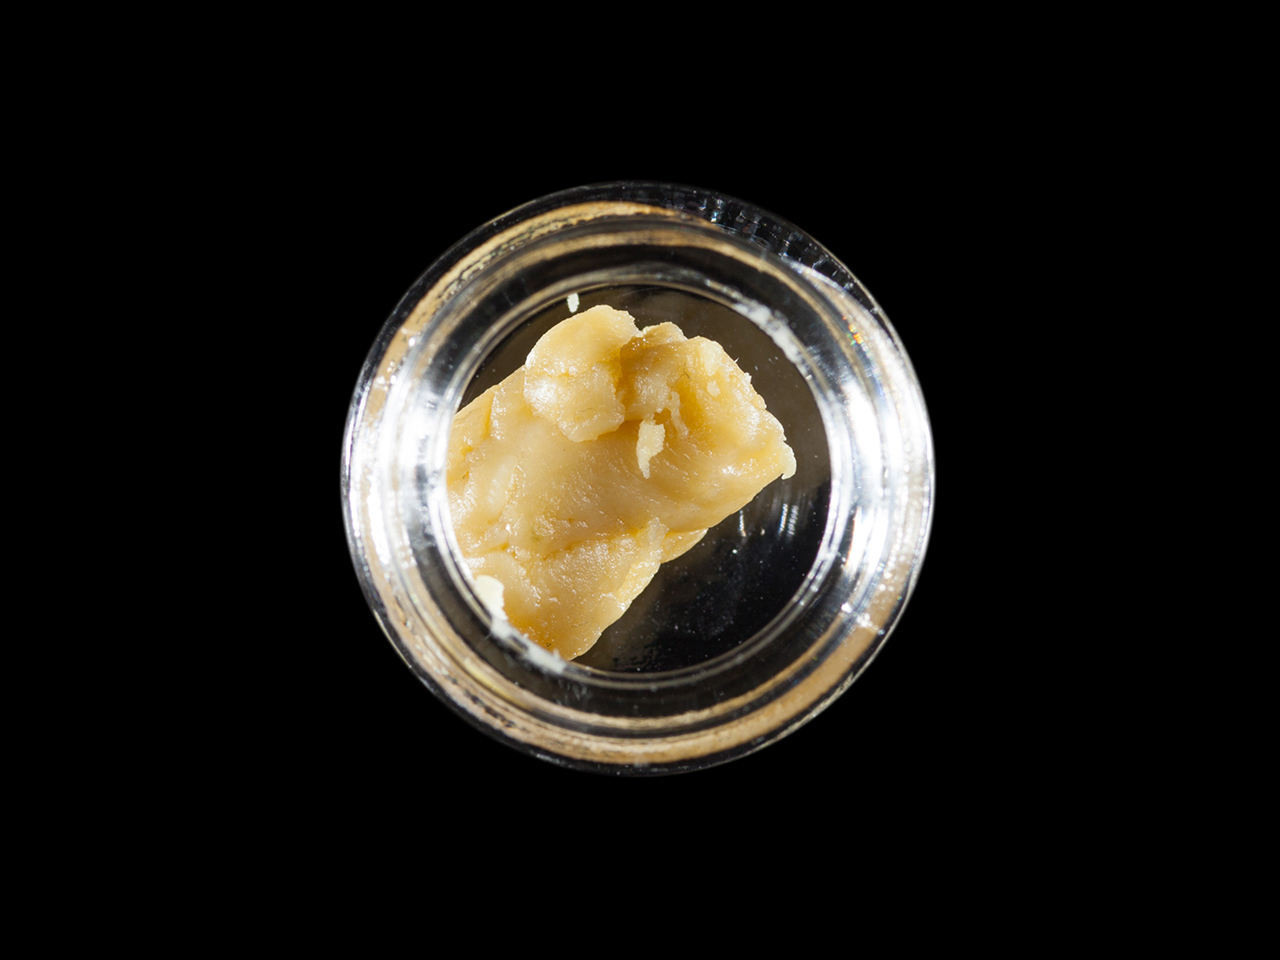 2016 Michigan Medical Cannabis Cup: Top 5 Indica Concentrates - Cannabis Cup